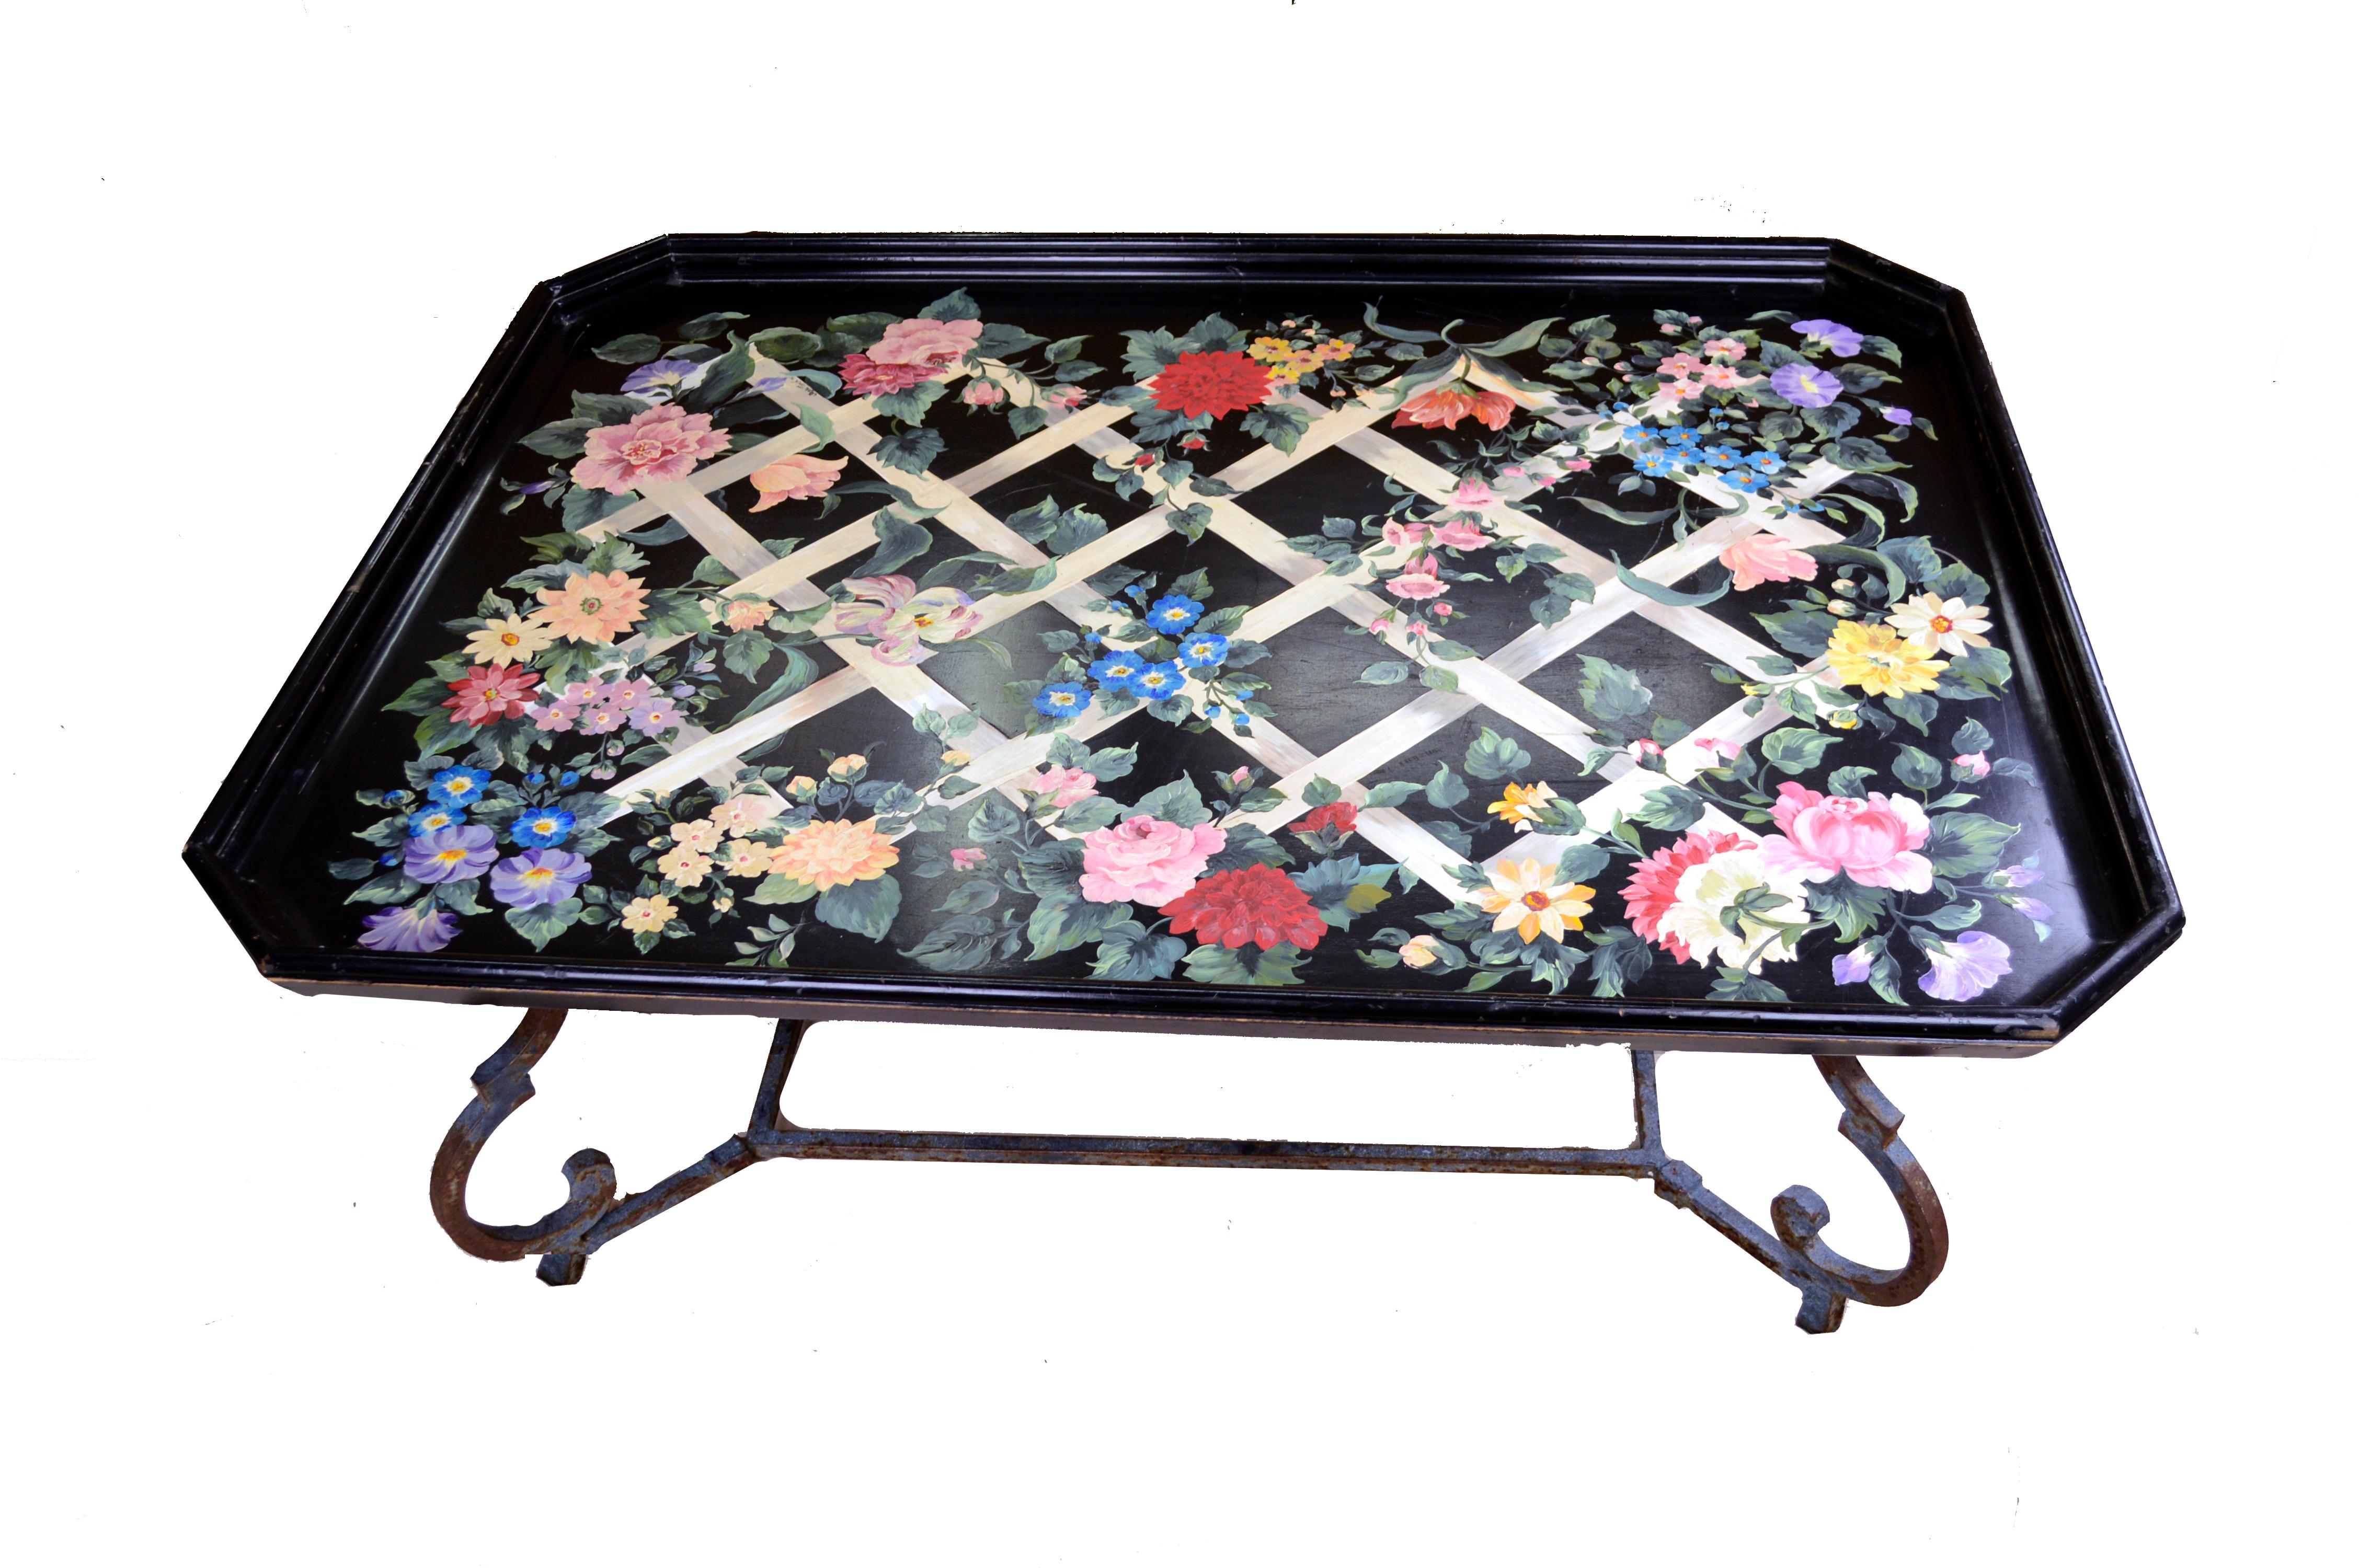 Tole Painting Lattice Work design Large Tray Table Painted by Shari Tipich For Sale 1